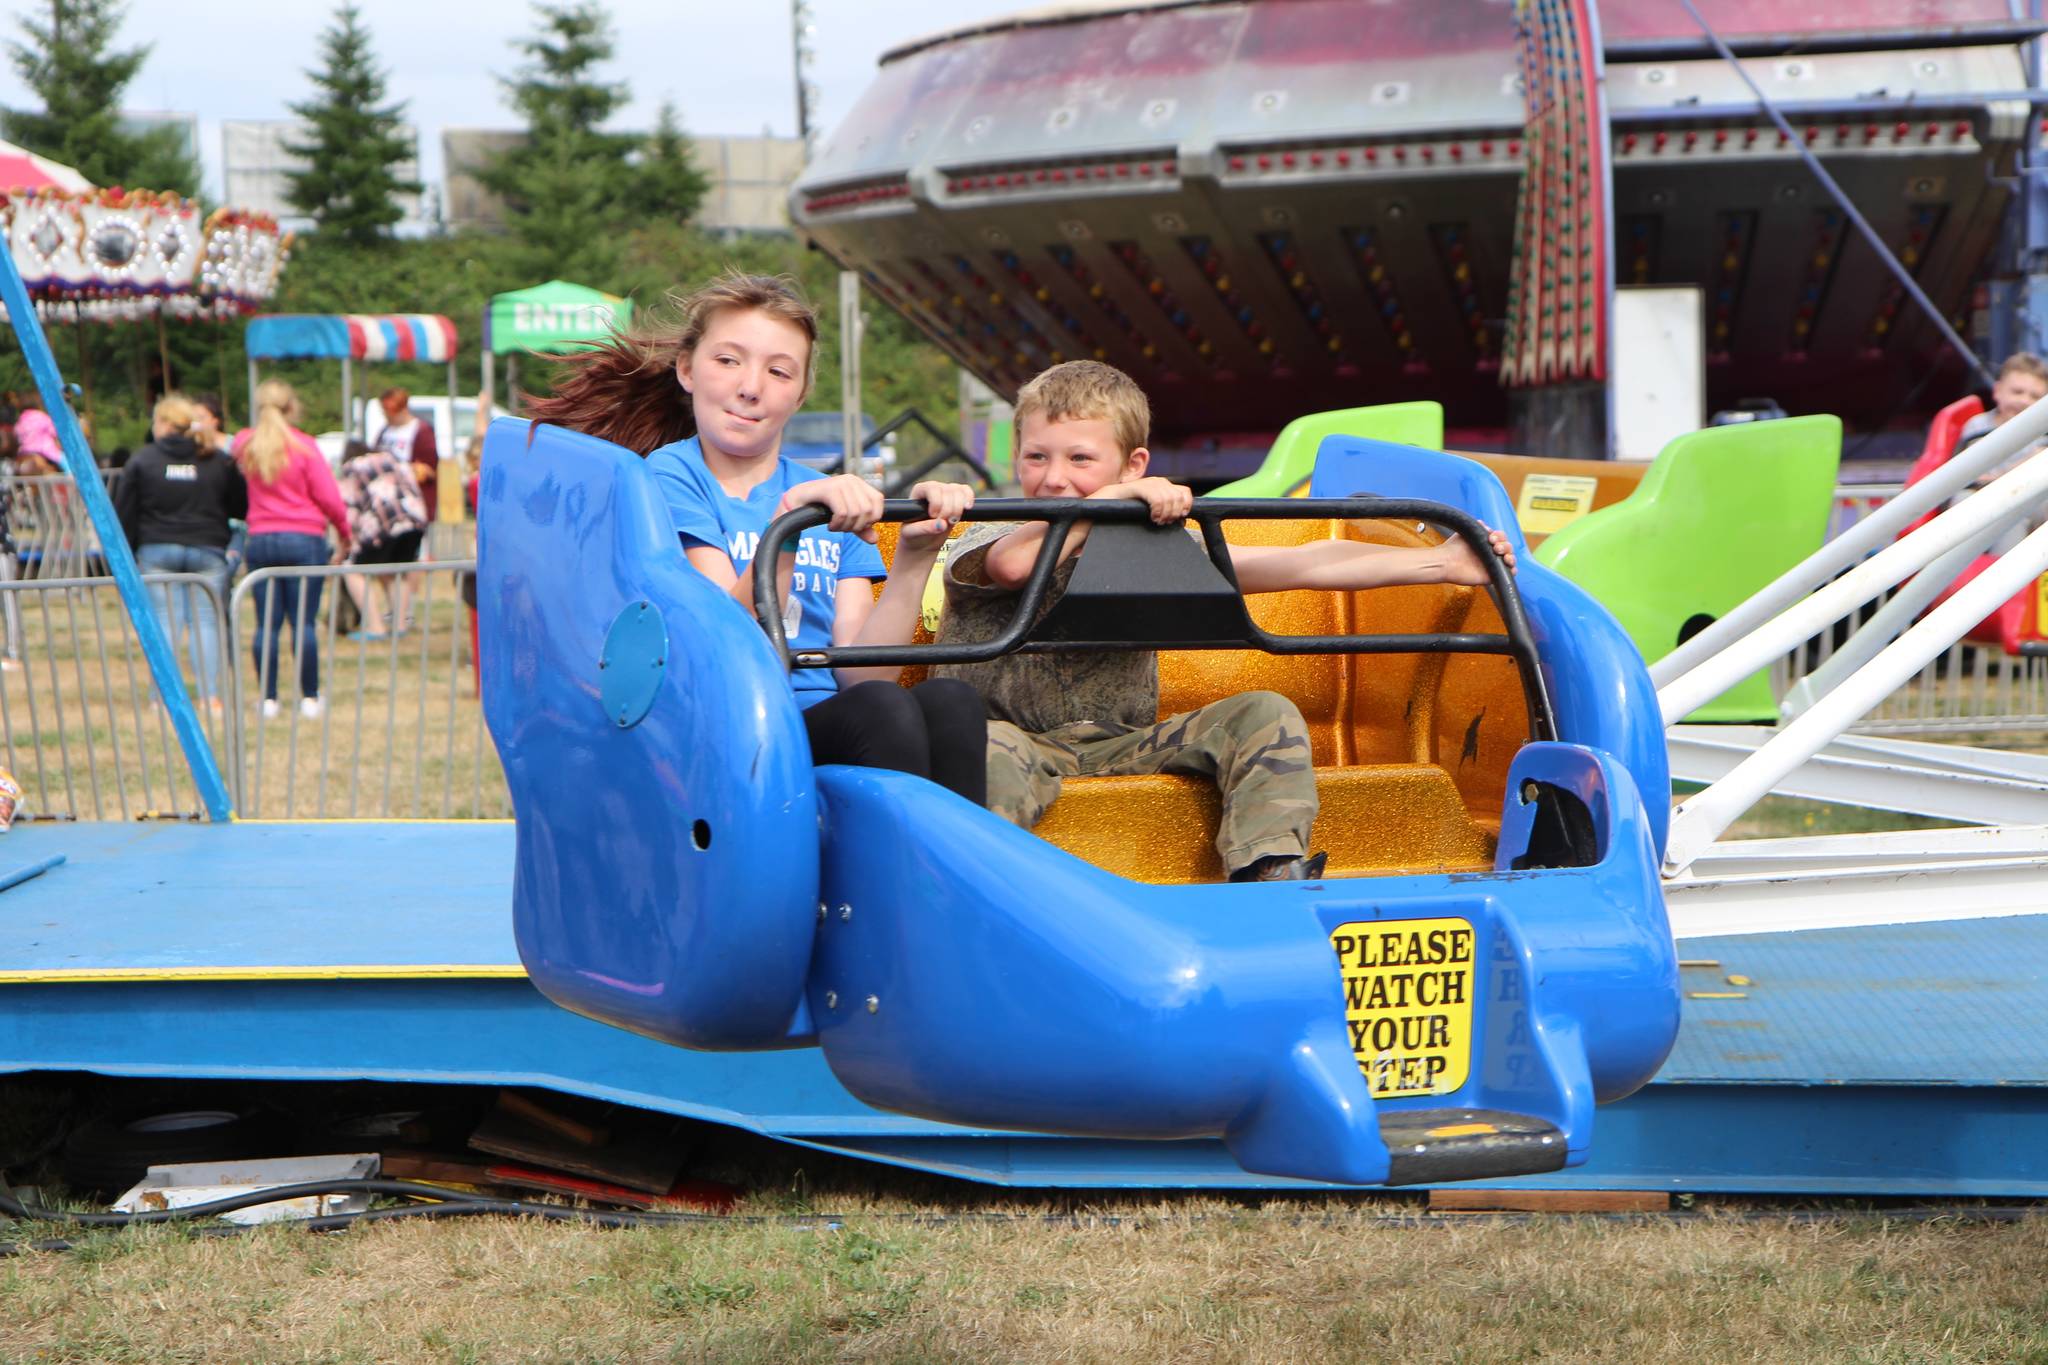 Riders go for a spin at the Fair.